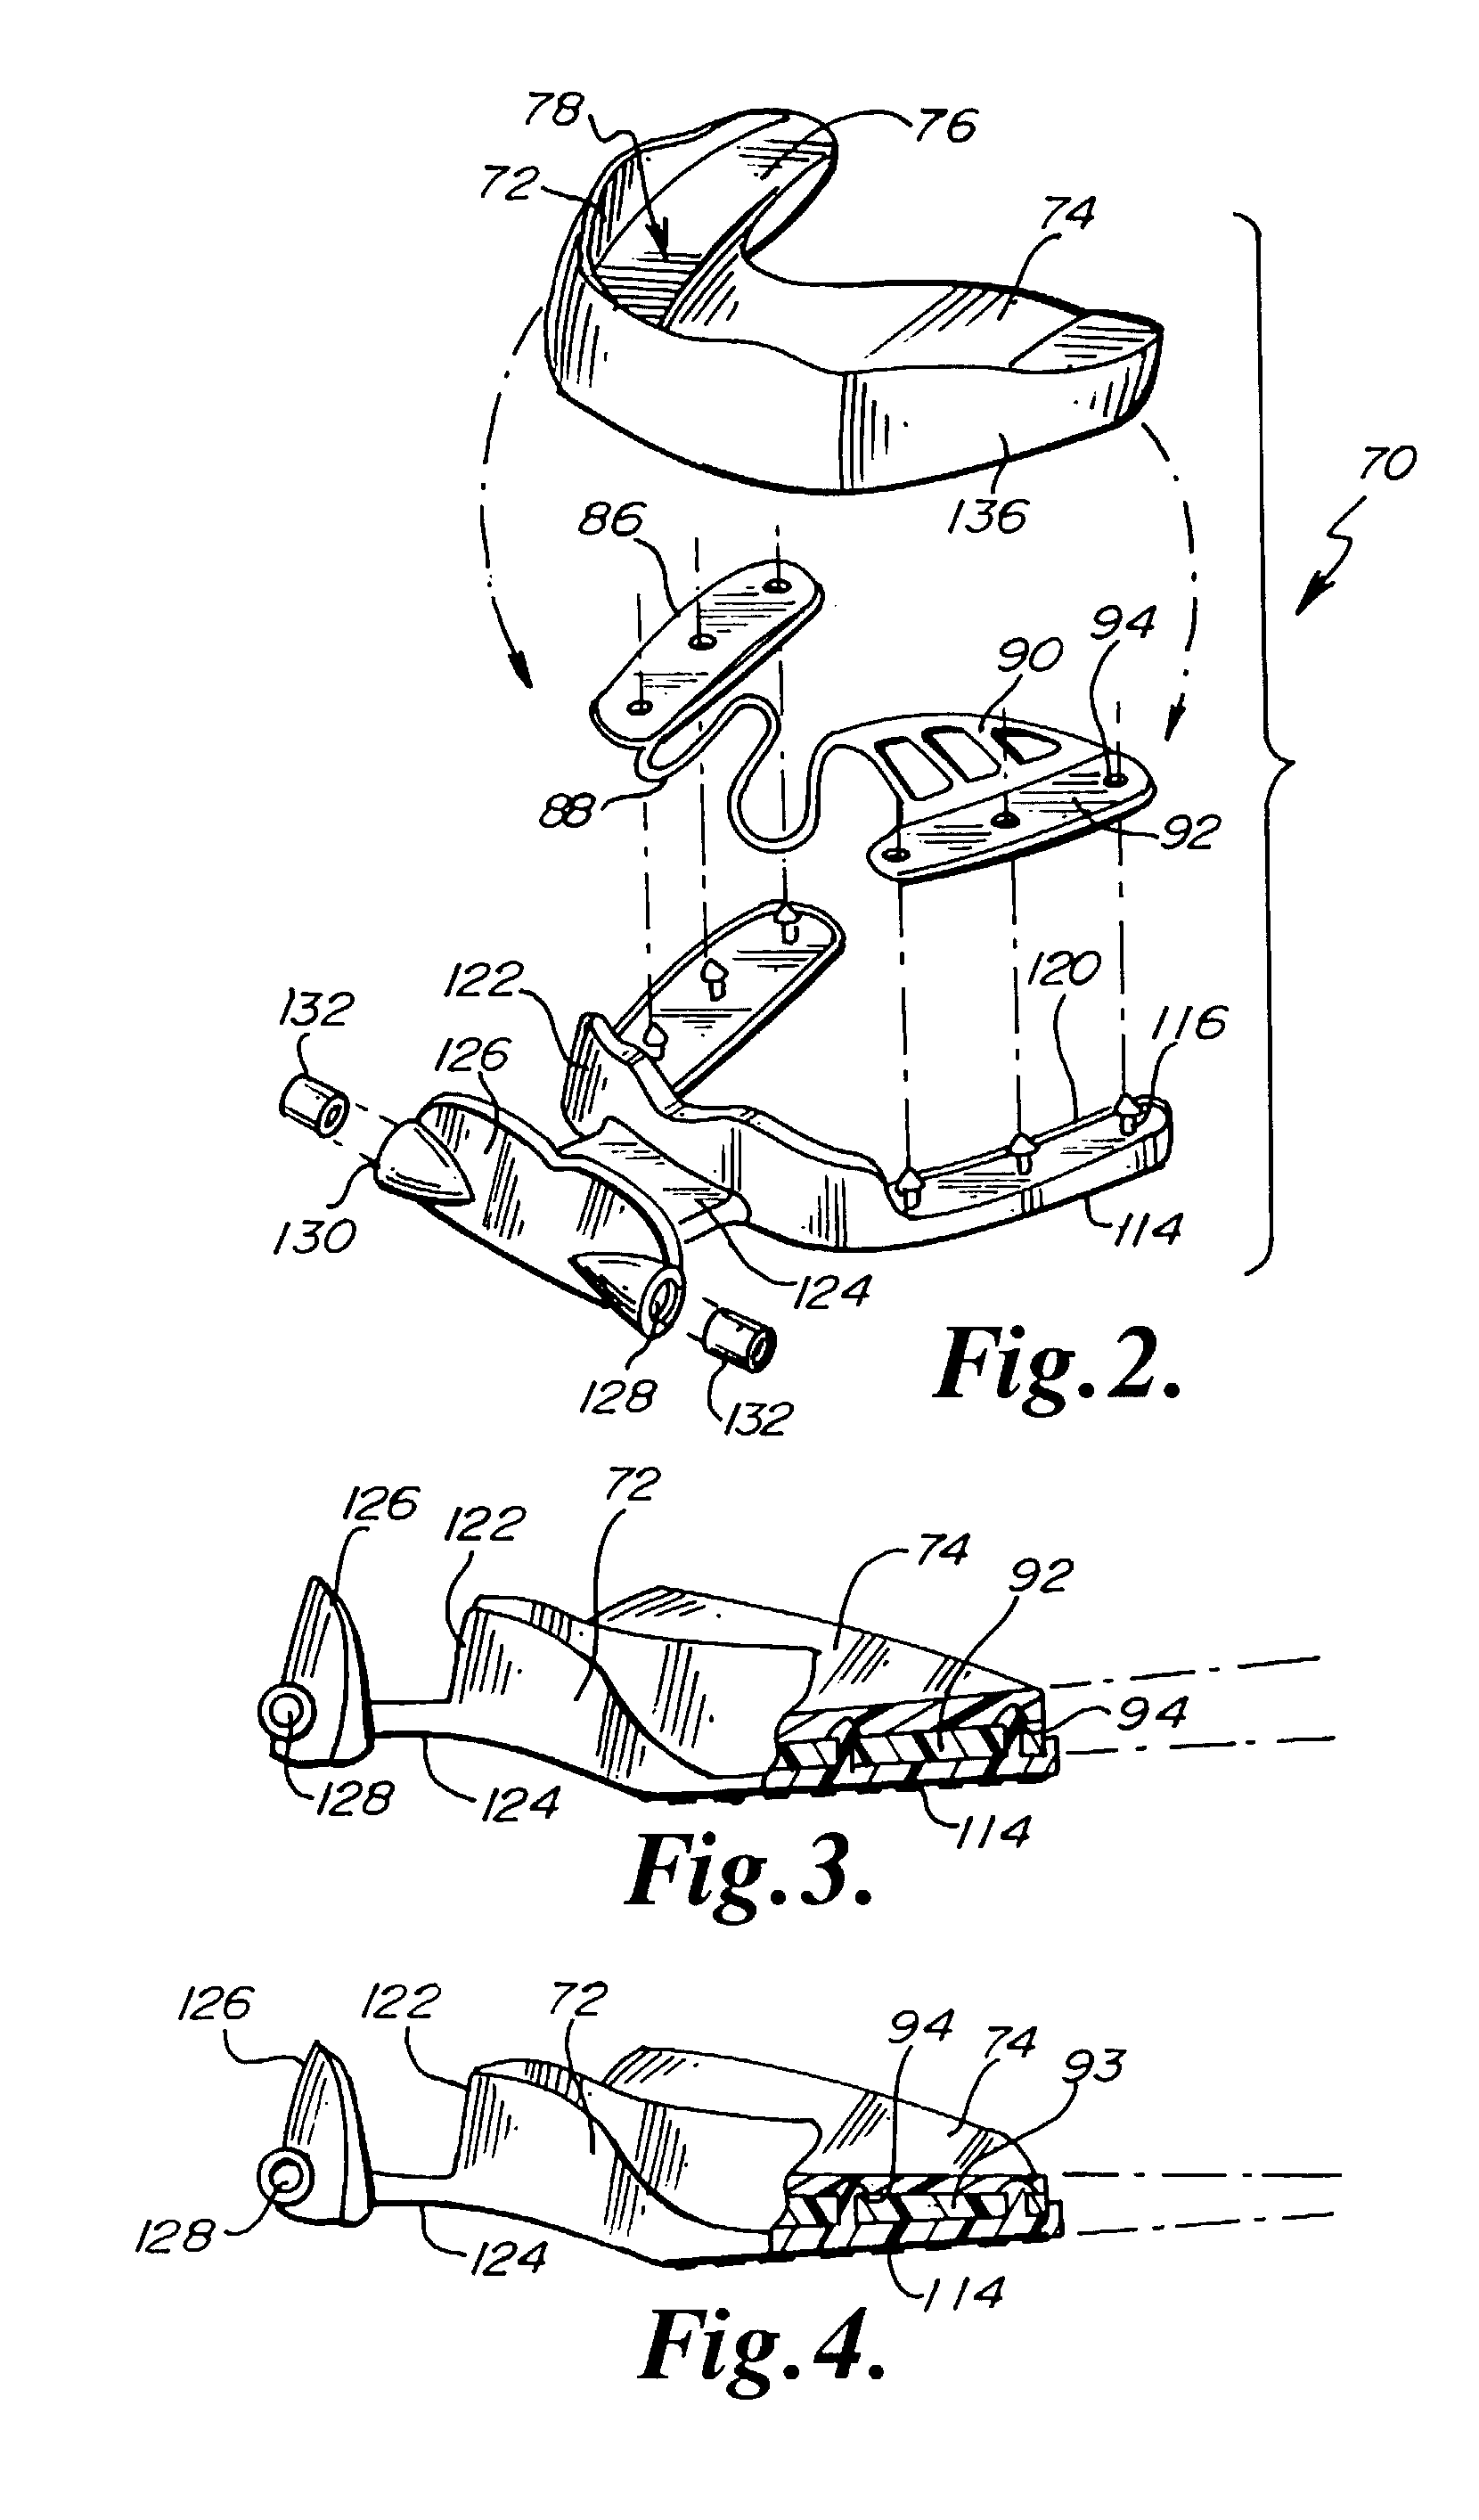 Composite performance enhancing tethered mouthguard